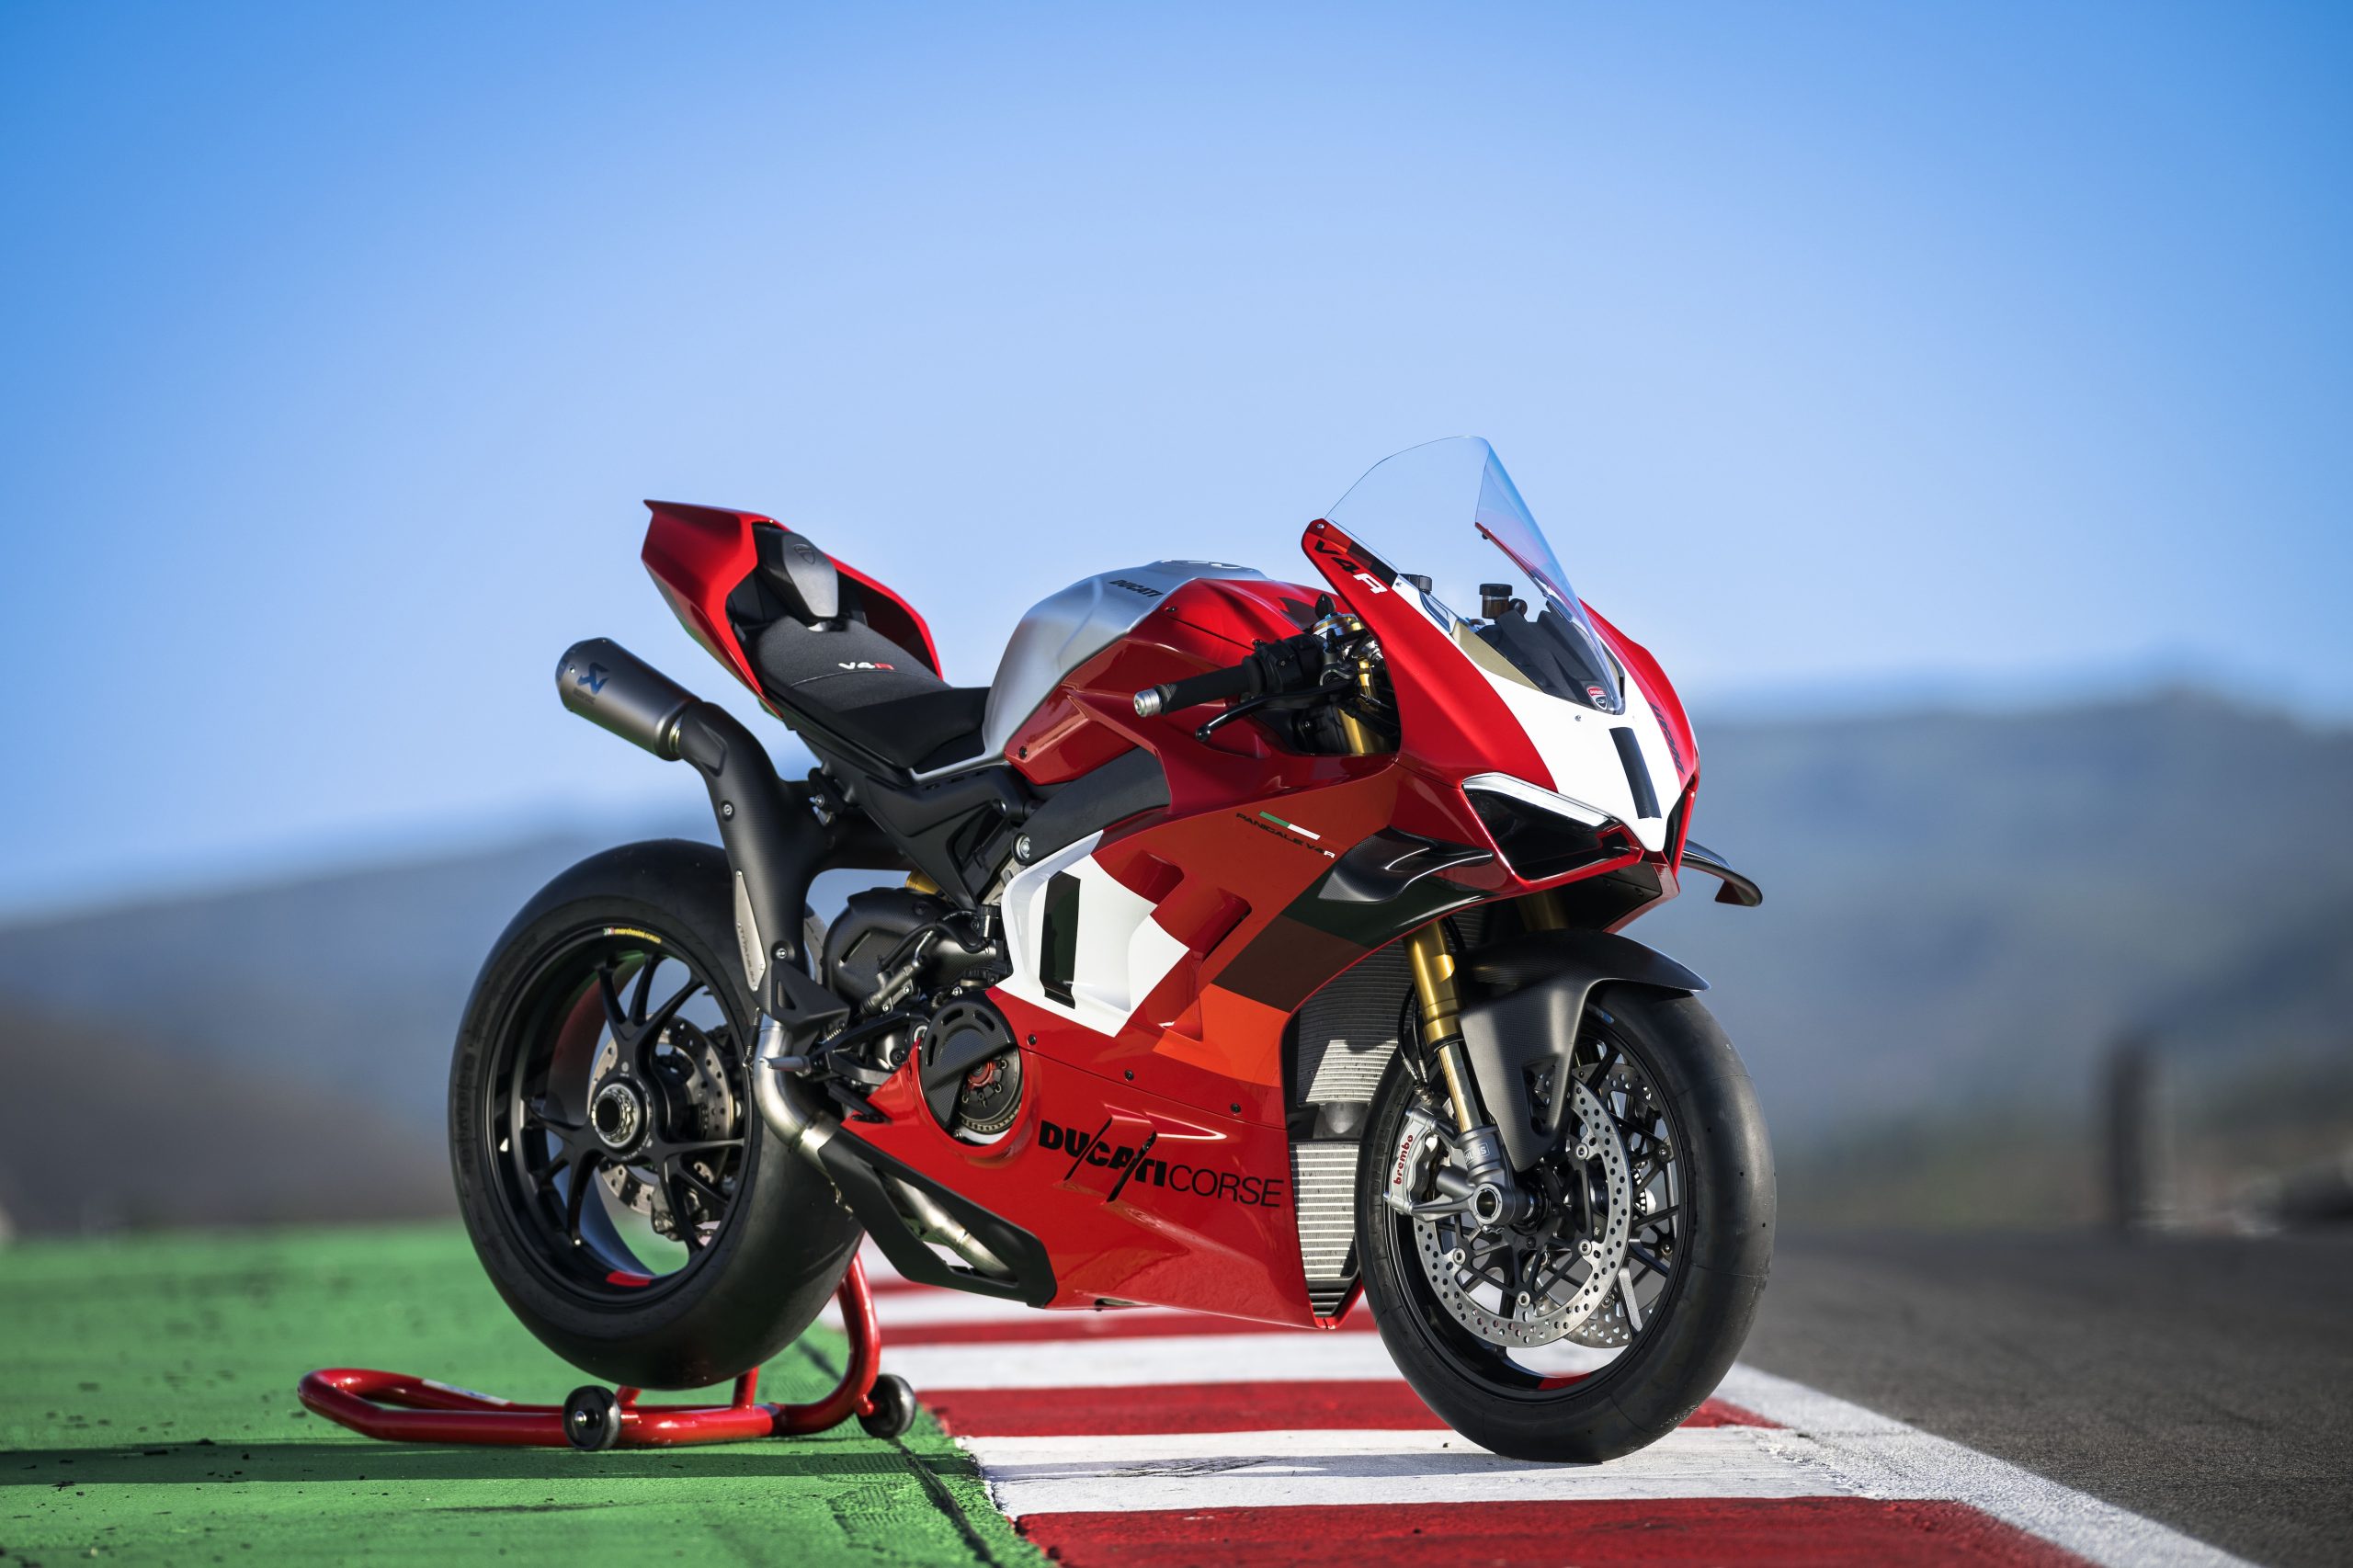 2023 Ducati Panigale V4 R: How Does 240.5 HP At 16,500 RPM Grab